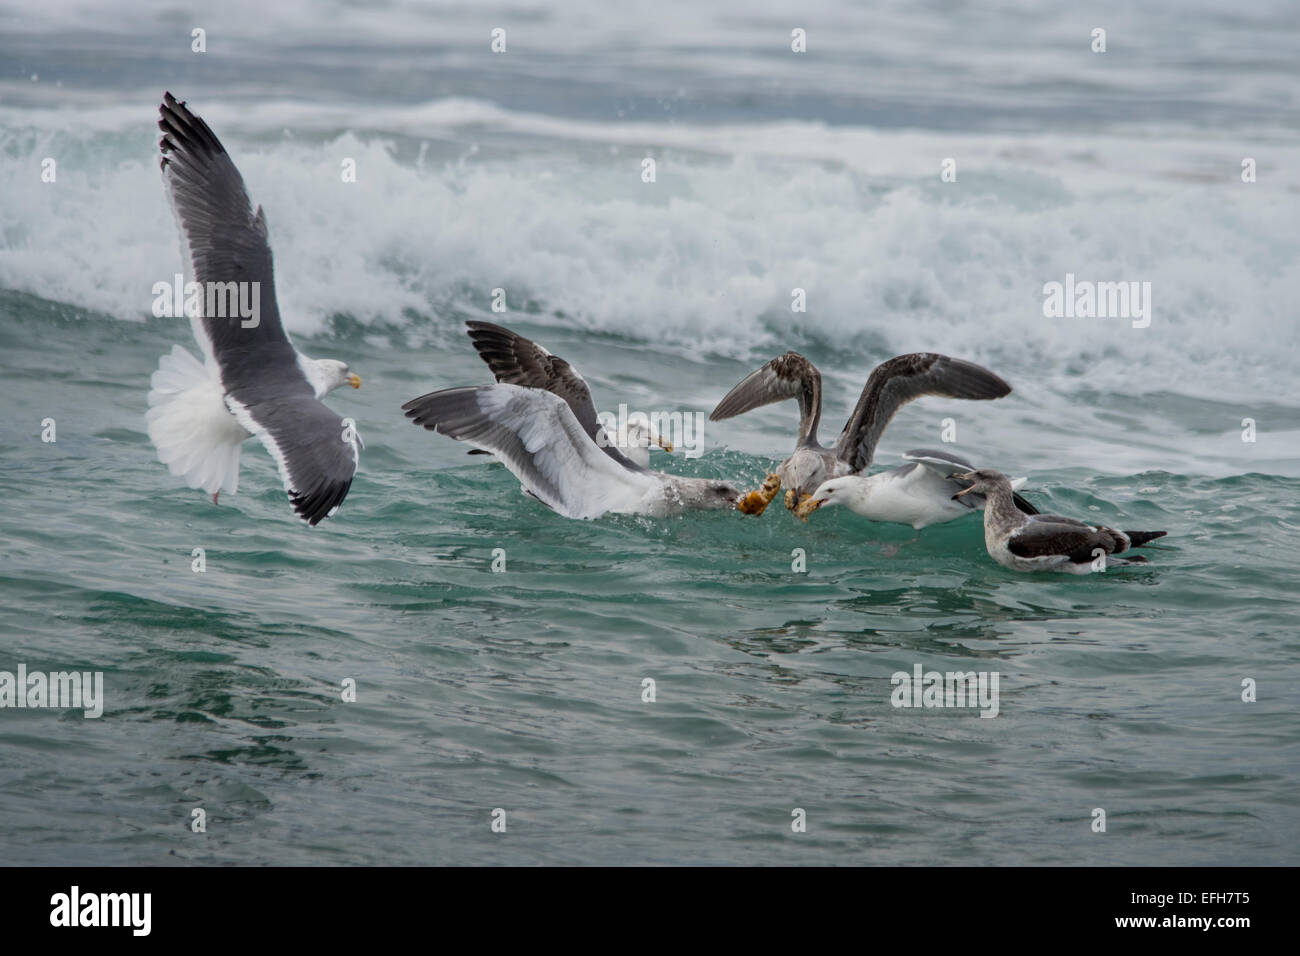 Seagulls in the surf fighting over food. Stock Photo